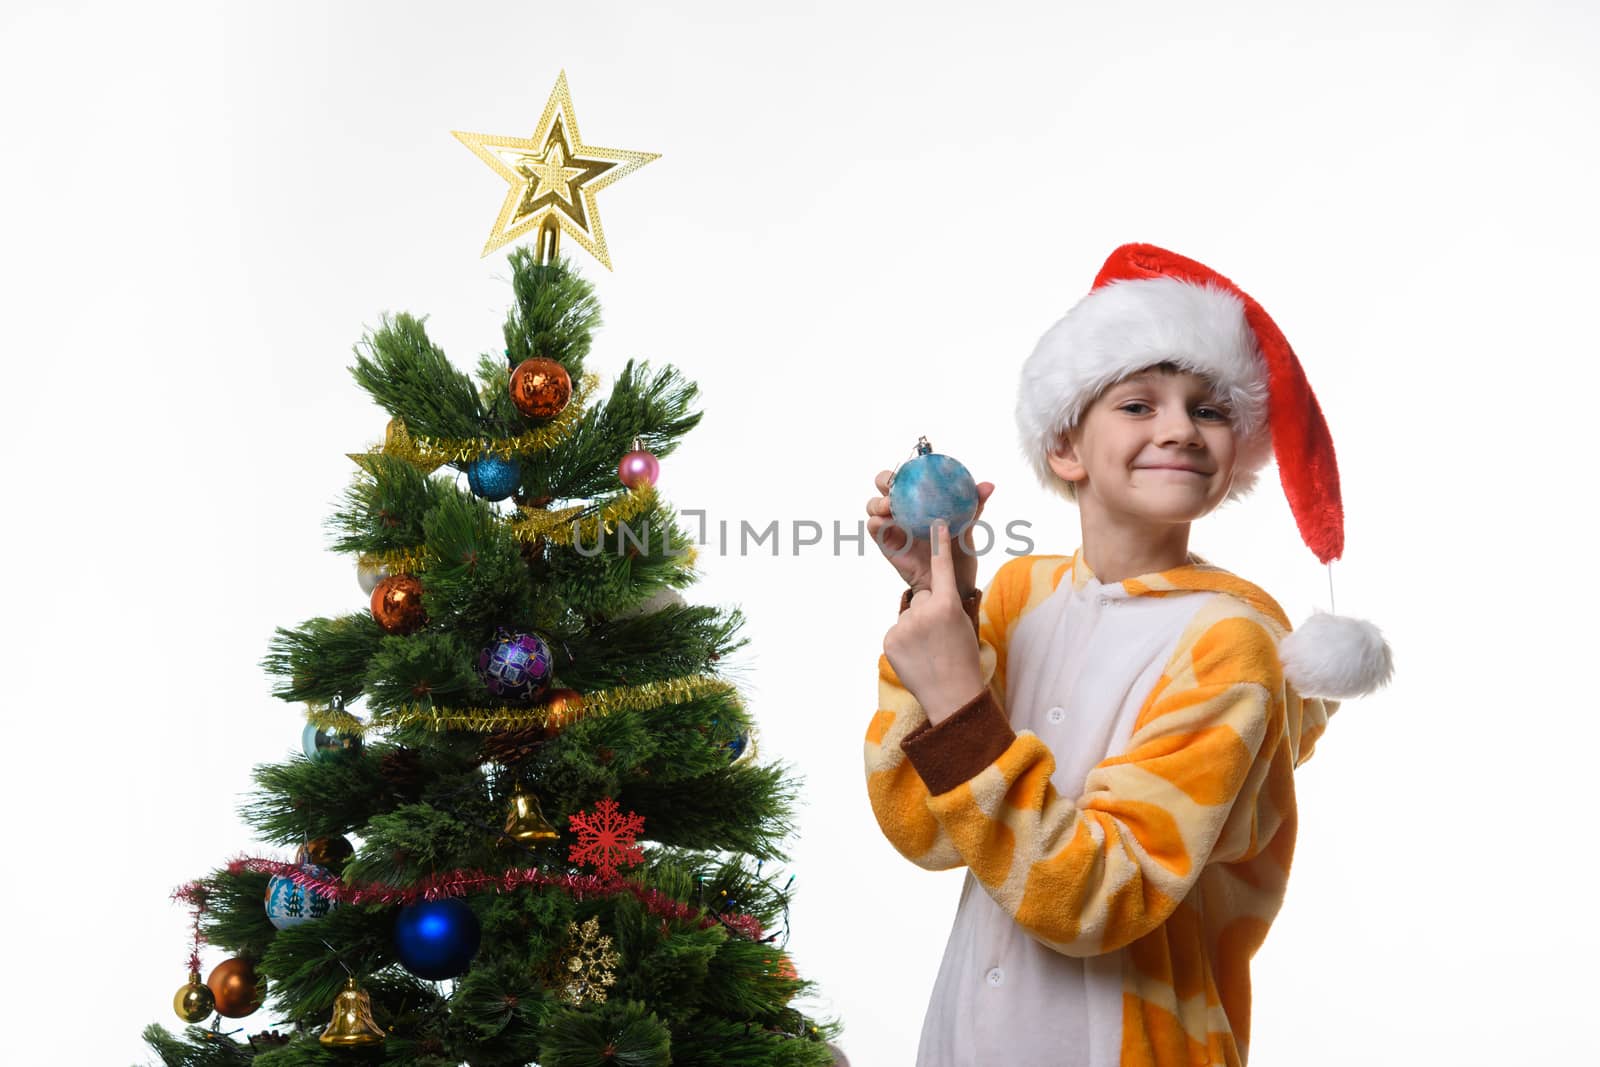 The girl at the Christmas tree shows a Christmas toy